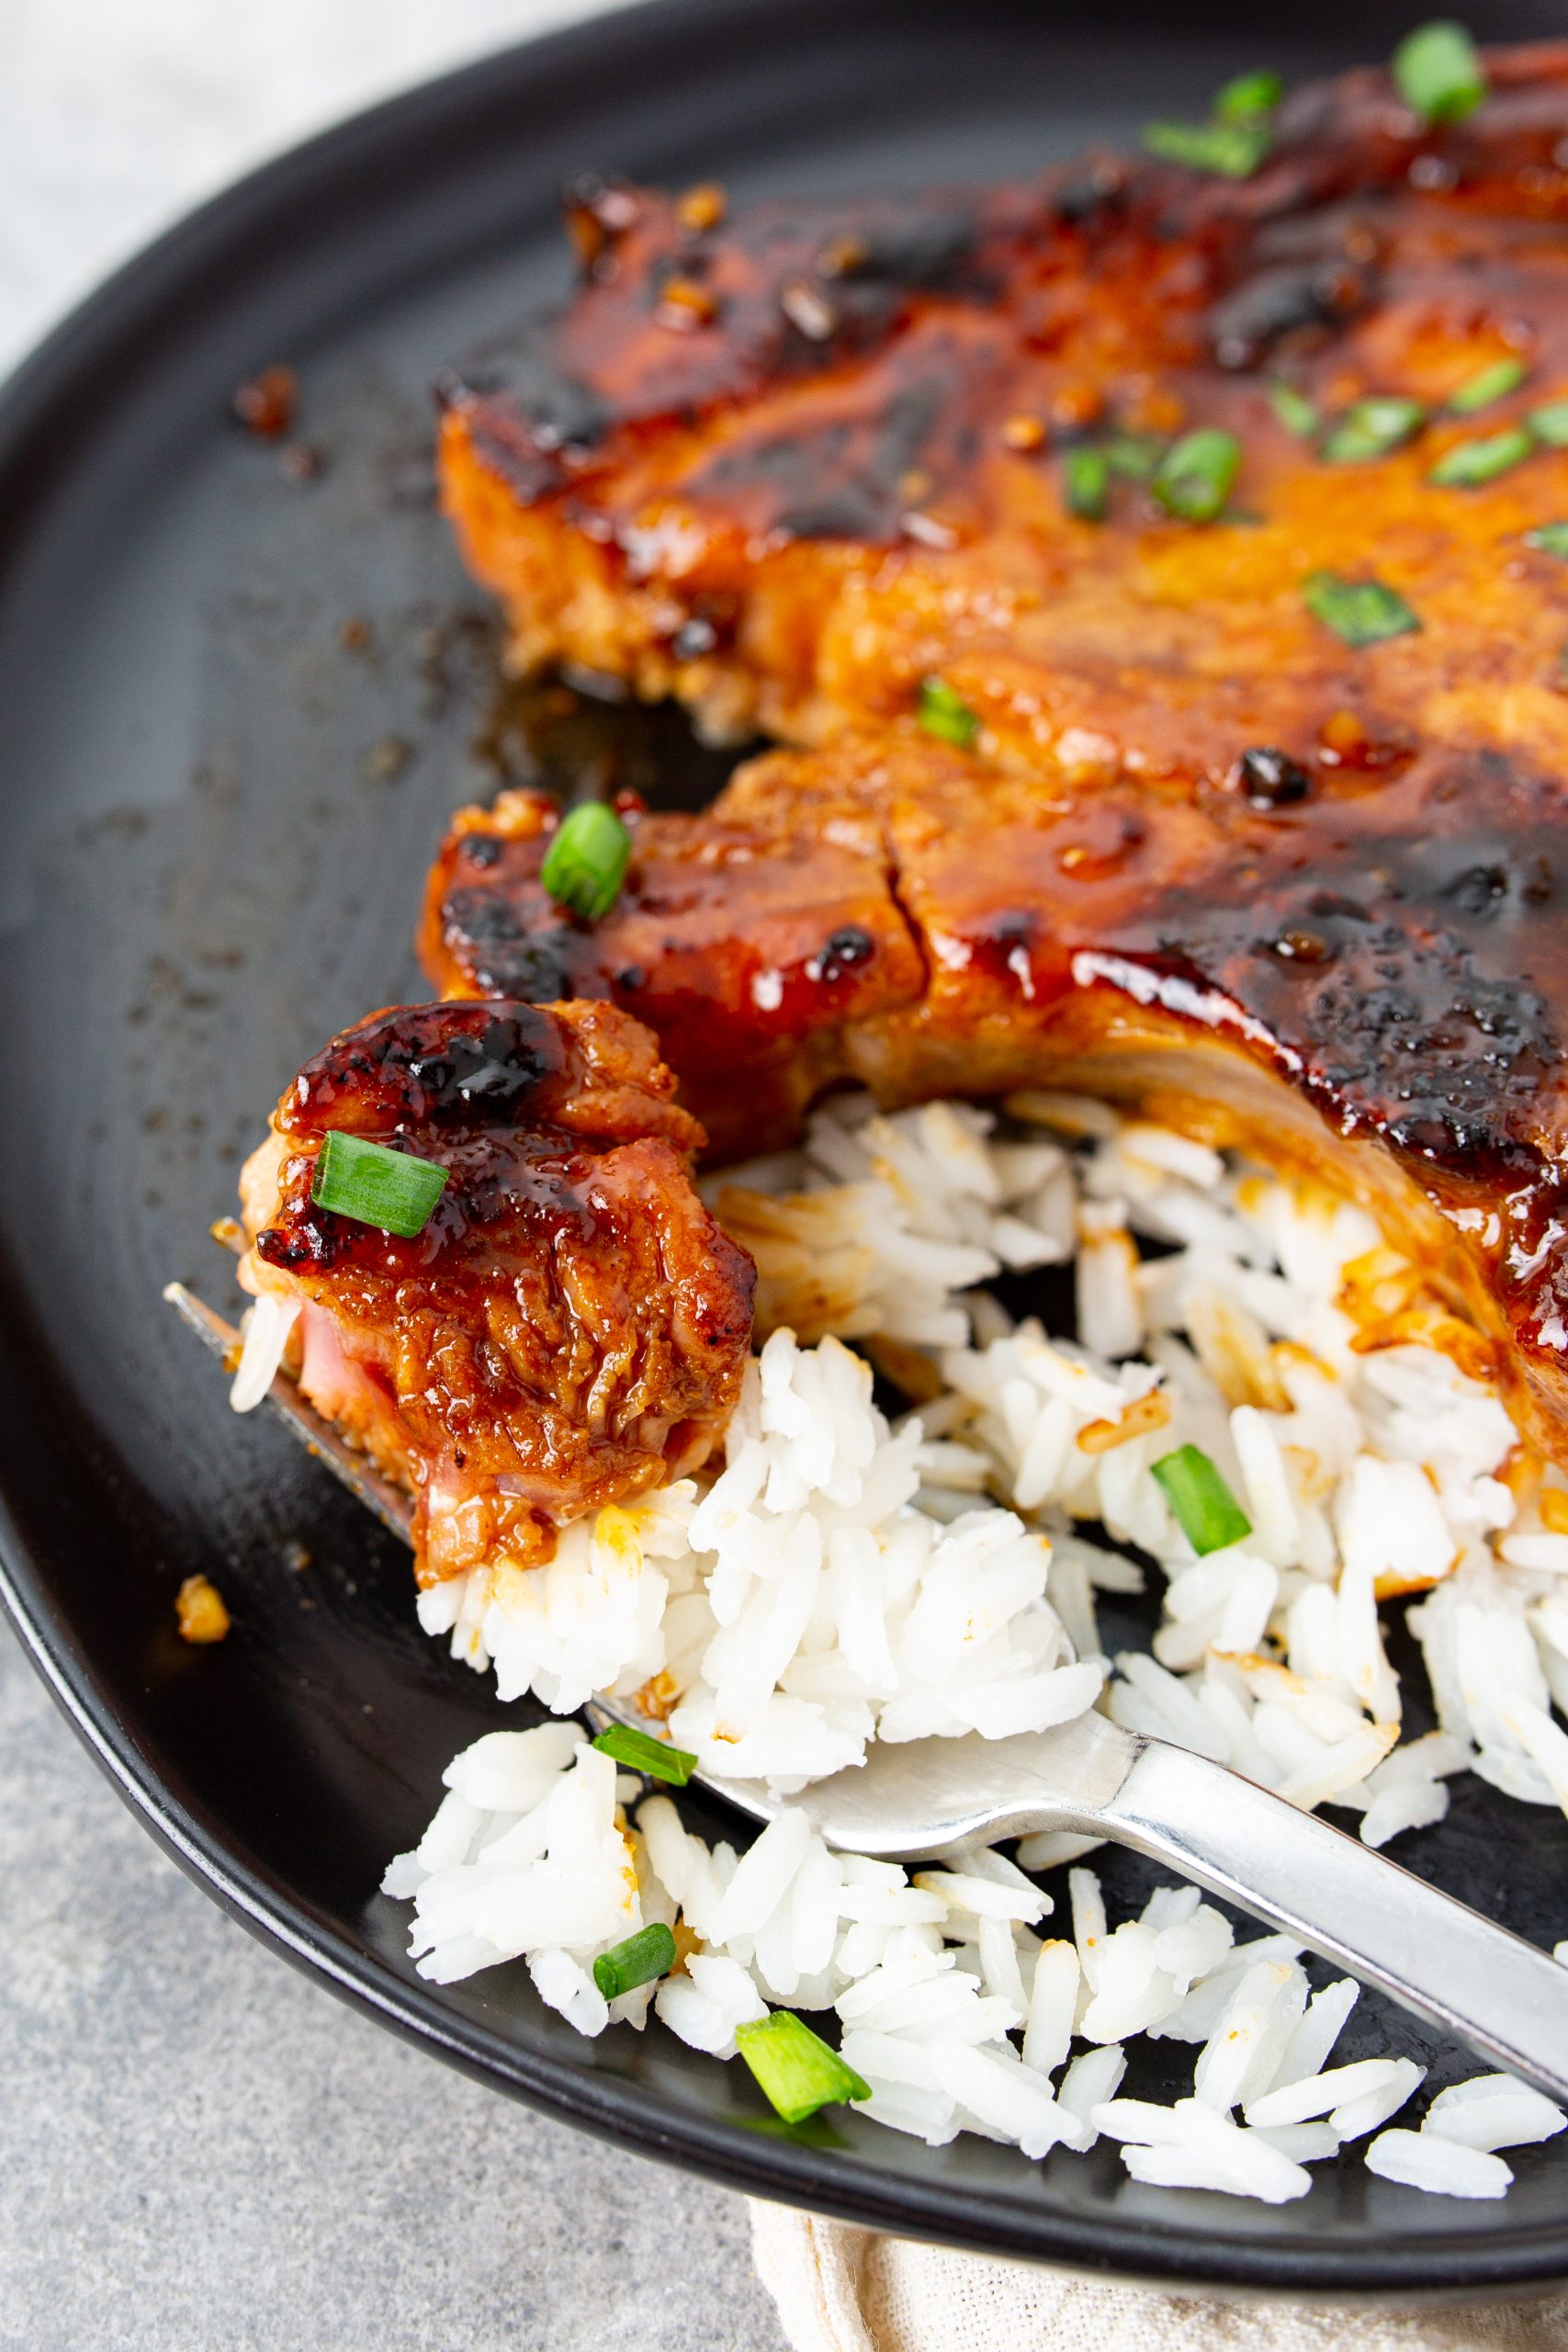 A grilled pork chop with a bite taken out is placed on a plate over white rice, garnished with green onions. A fork rests on the side of the plate.